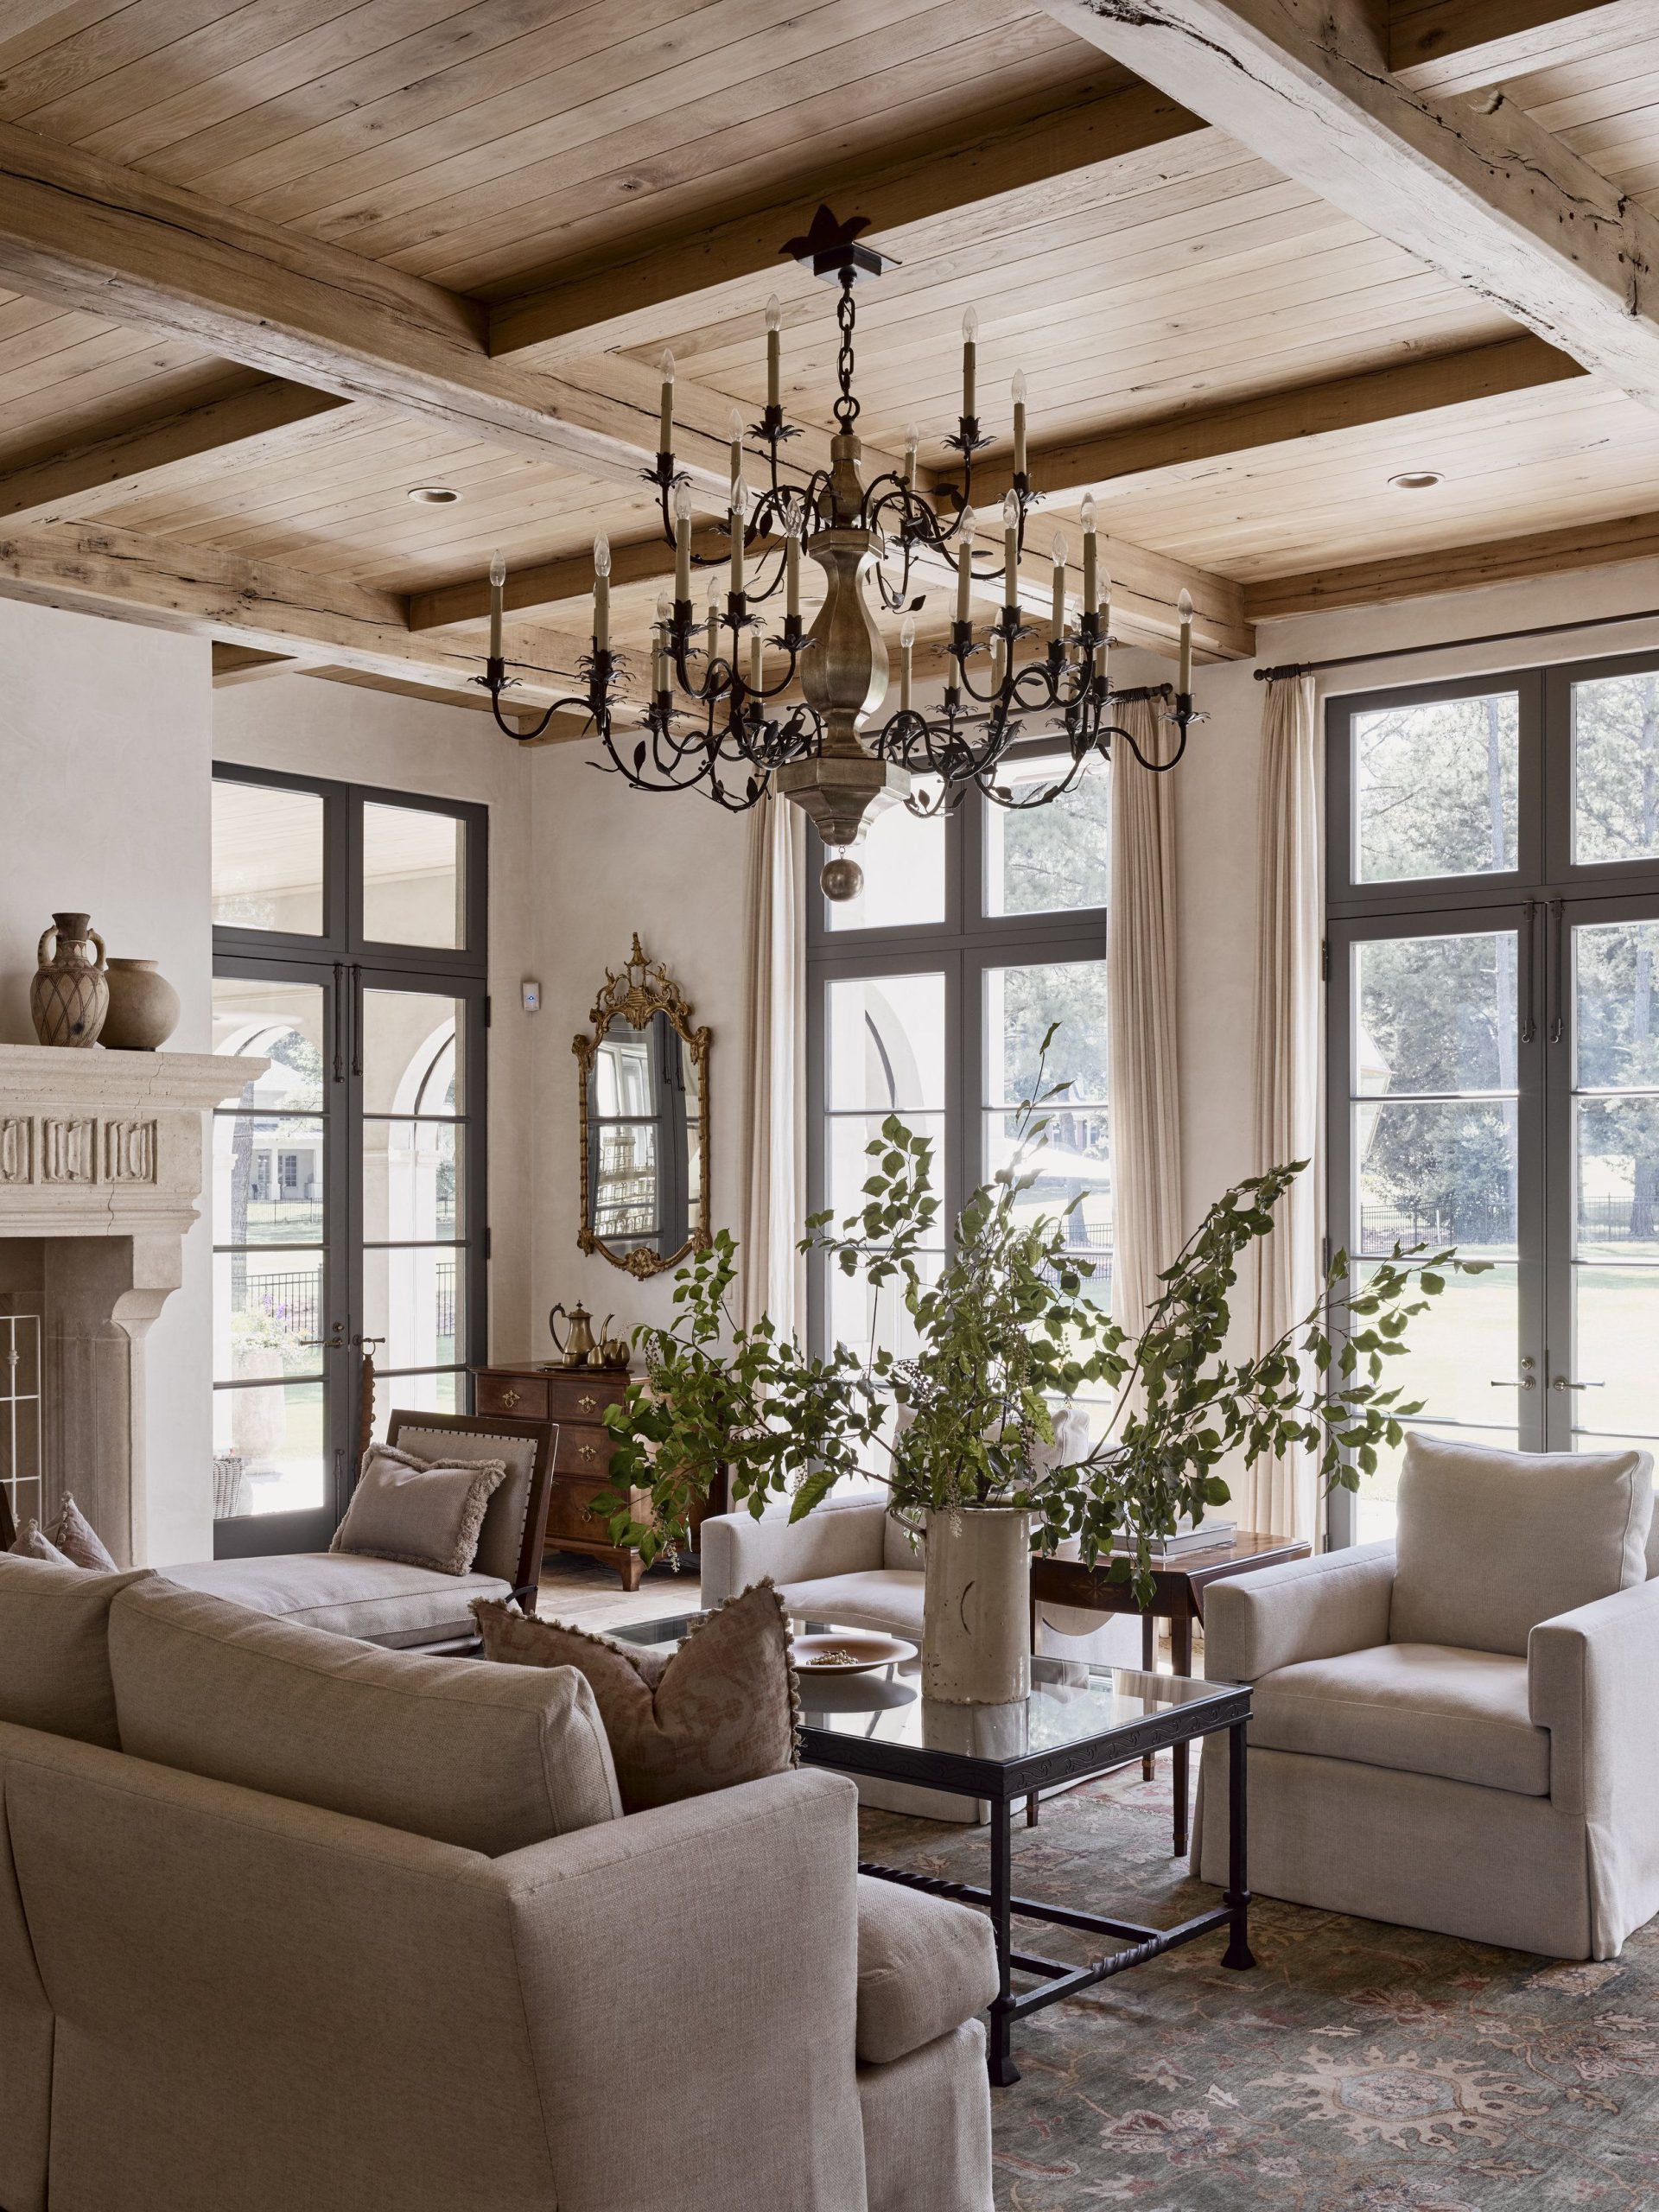 Wooden Ceiling For French Country